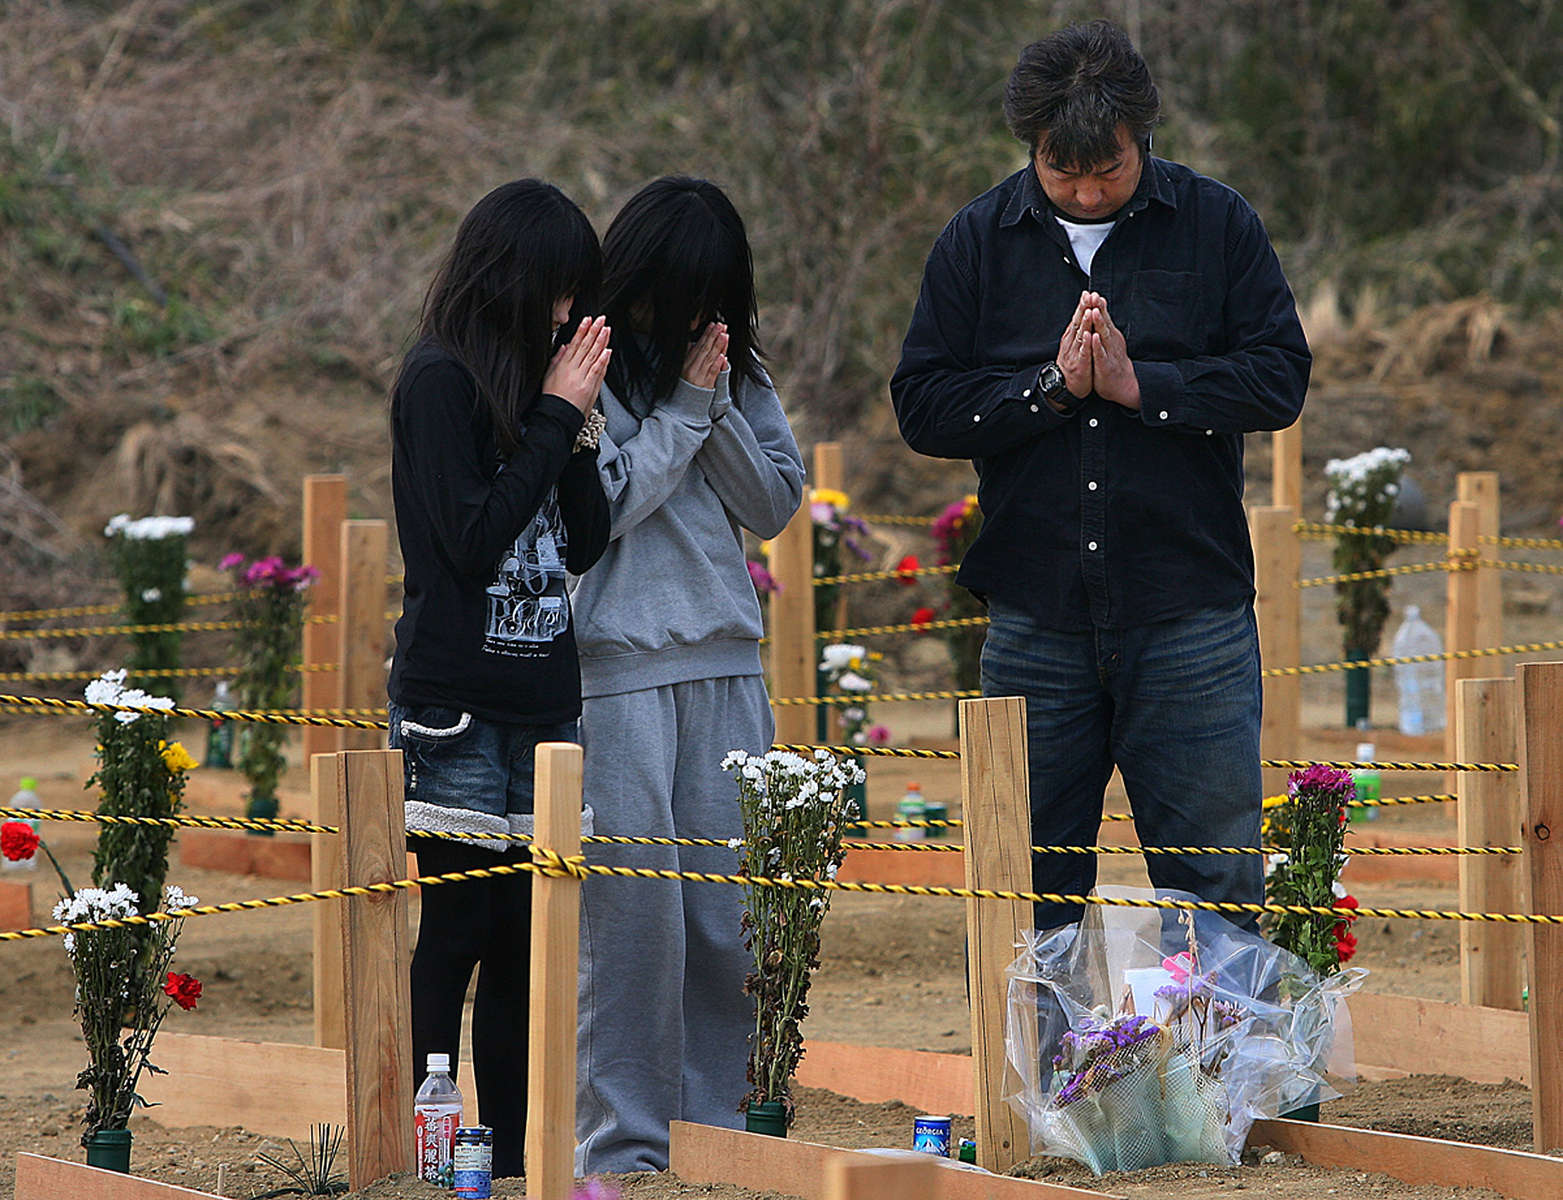 A man and his two daughters pray over a grave at a temporary burial site near a recycling centerin Higashimatsushima, a ward of Sendai, Japan. (The Press-Enterprise/ Mark Zaleski)